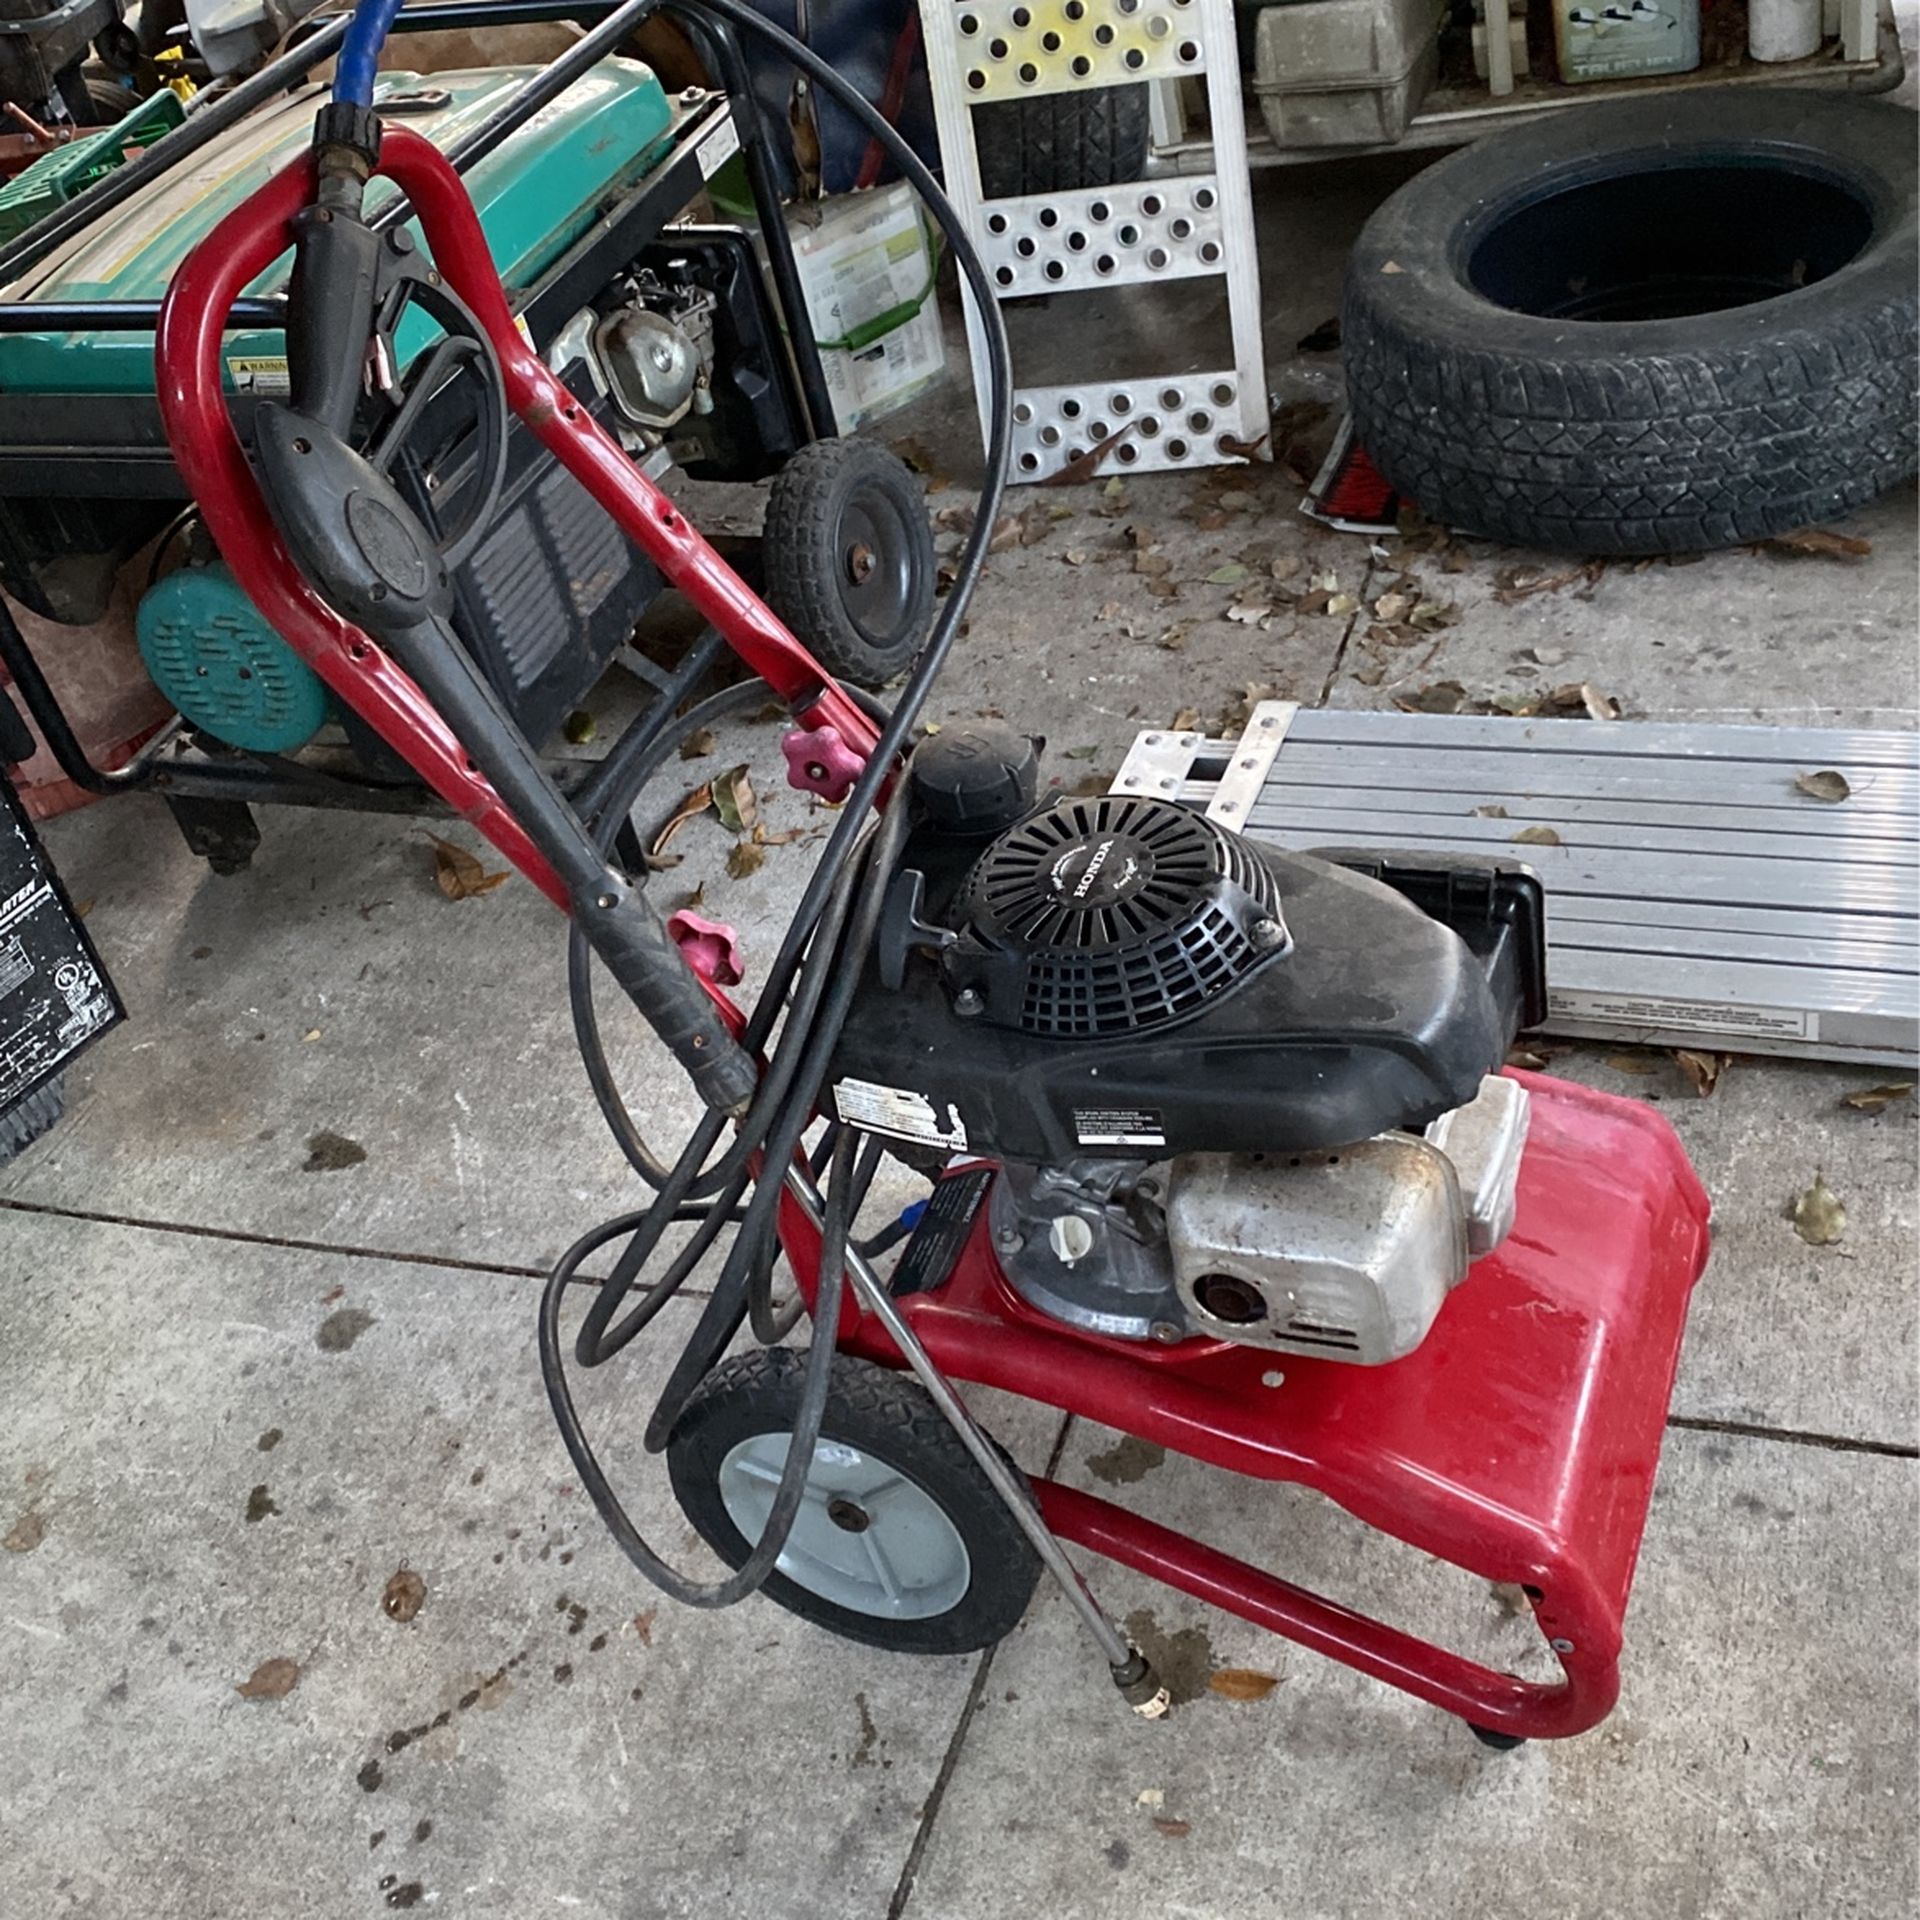 2800psi  Craftsman Pressure Washer Powered By Honda. Use Very Little Good Condition Ask 150.